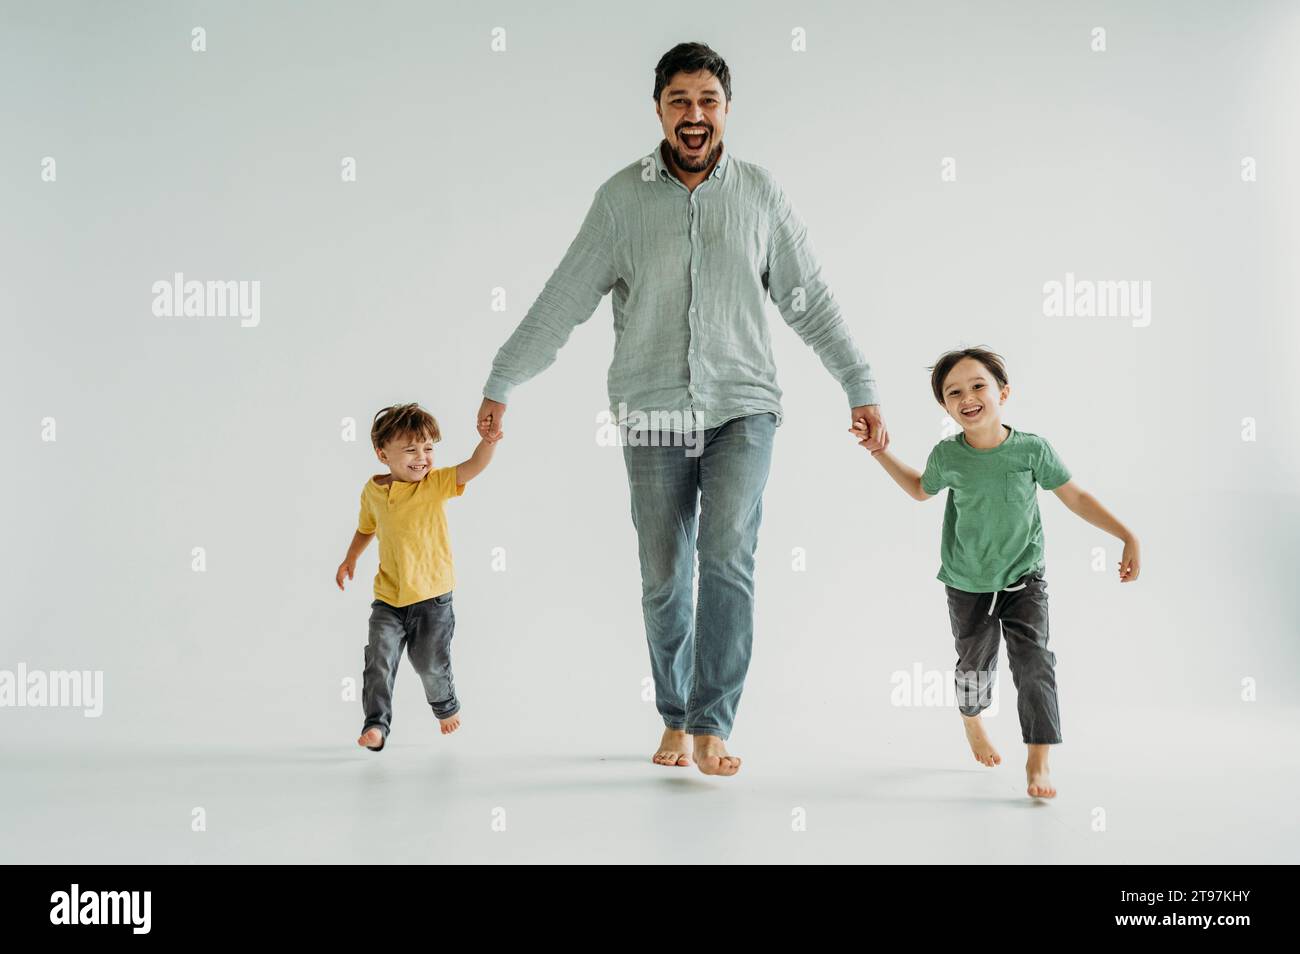 Happy father holding hands with children and running against white background Stock Photo